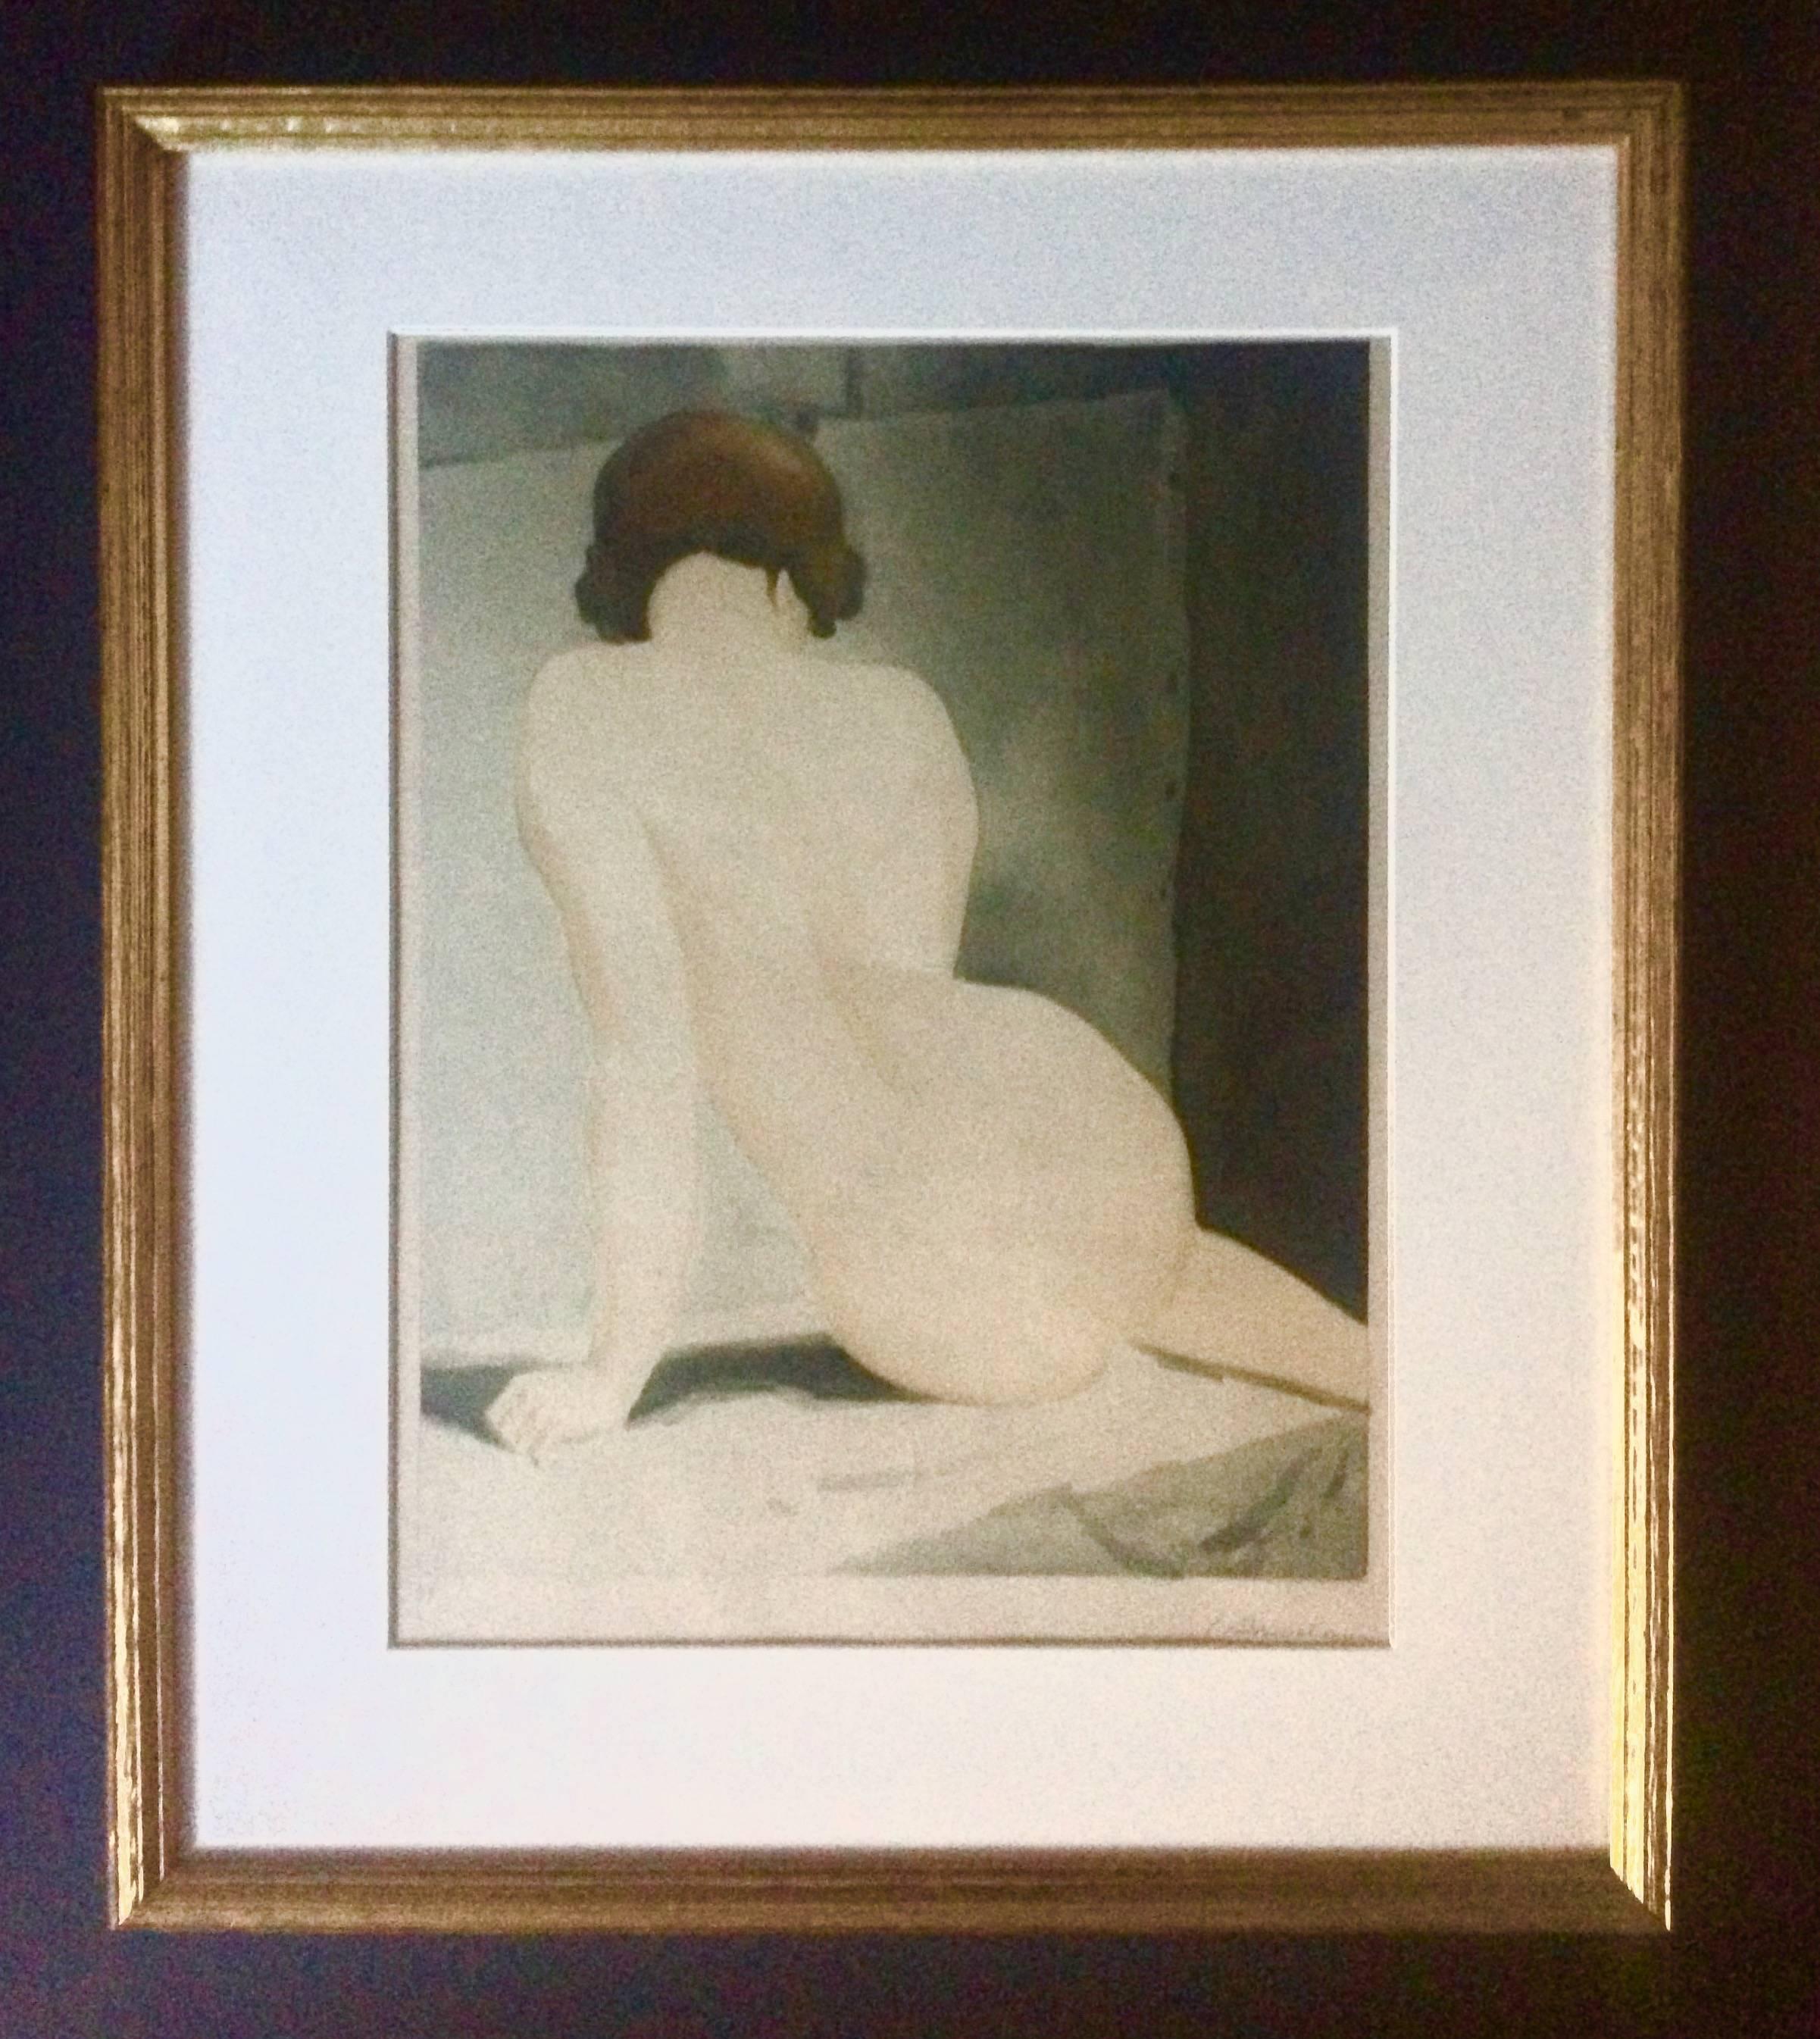 Vladimir Rozmainsky
Untitled Nude
1928
watercolor on paper
image size approx 14 x 10 inches
Frame size  approx 20 x 17 inches
Signed, and dated at bottom
Very good condition, minor handling creases
Archivally framed

Vladimir Rozmainsky